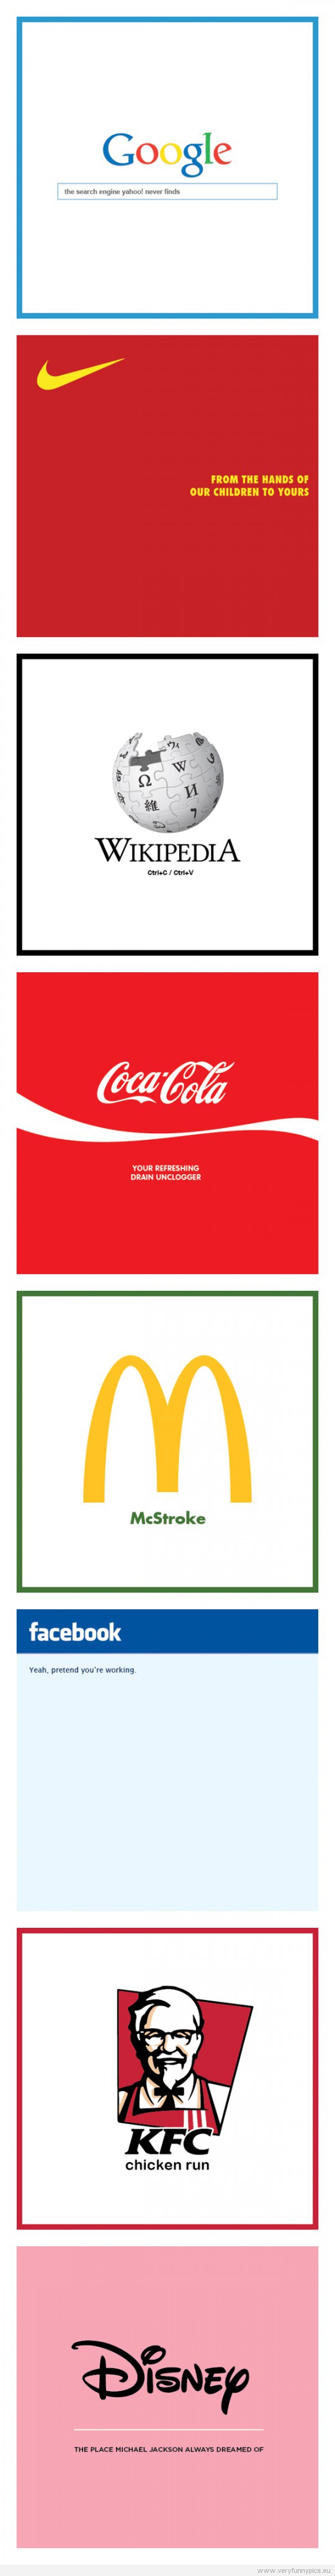 Funny Picture - Famous logos and what they are really saying